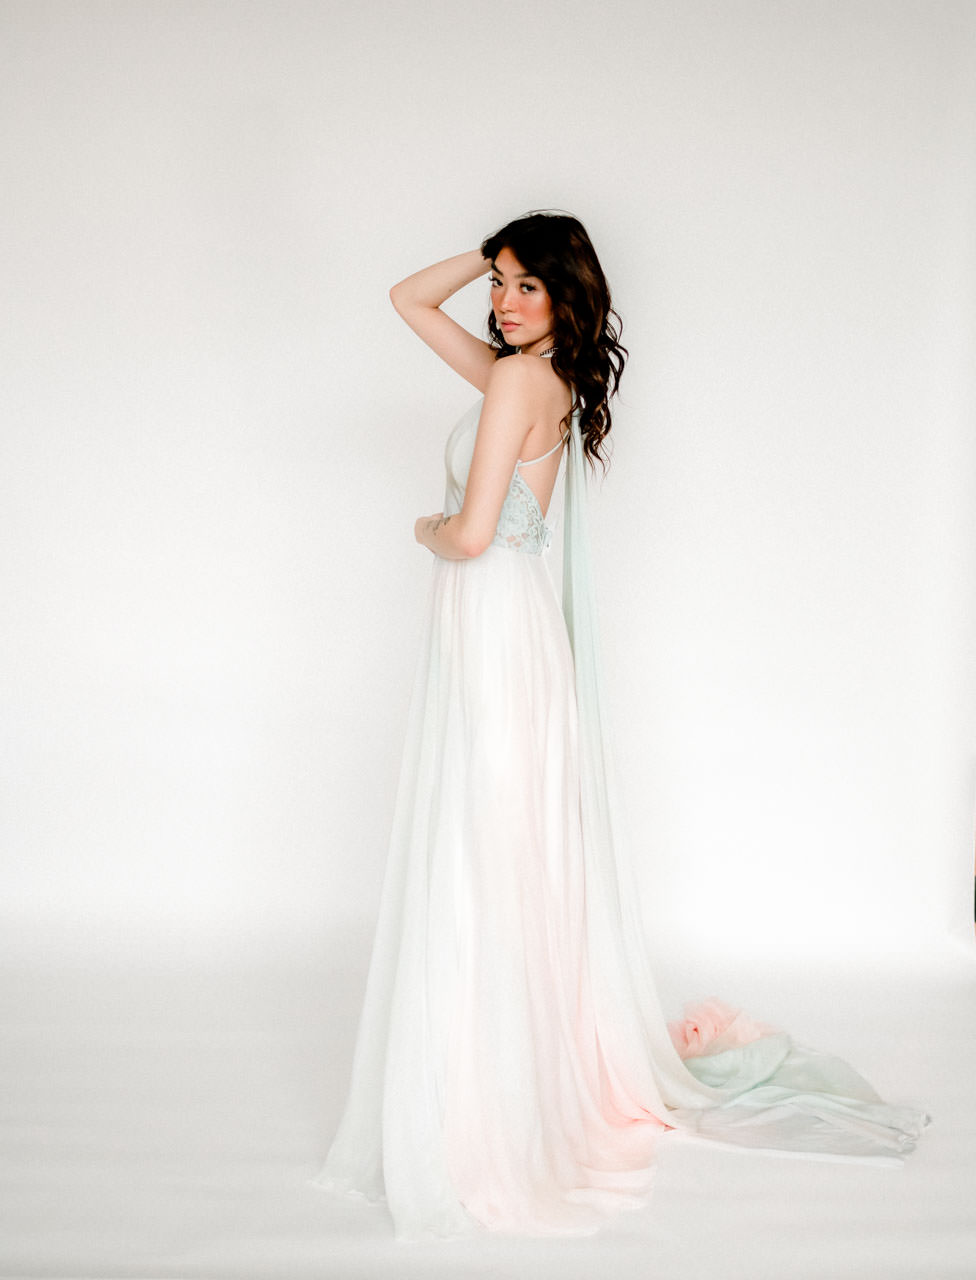 Vida Watercolor designer wedding gown with cape for rent to photographers, stylists, videographers, and other creatives to use in styled shoots and other editorial publications.